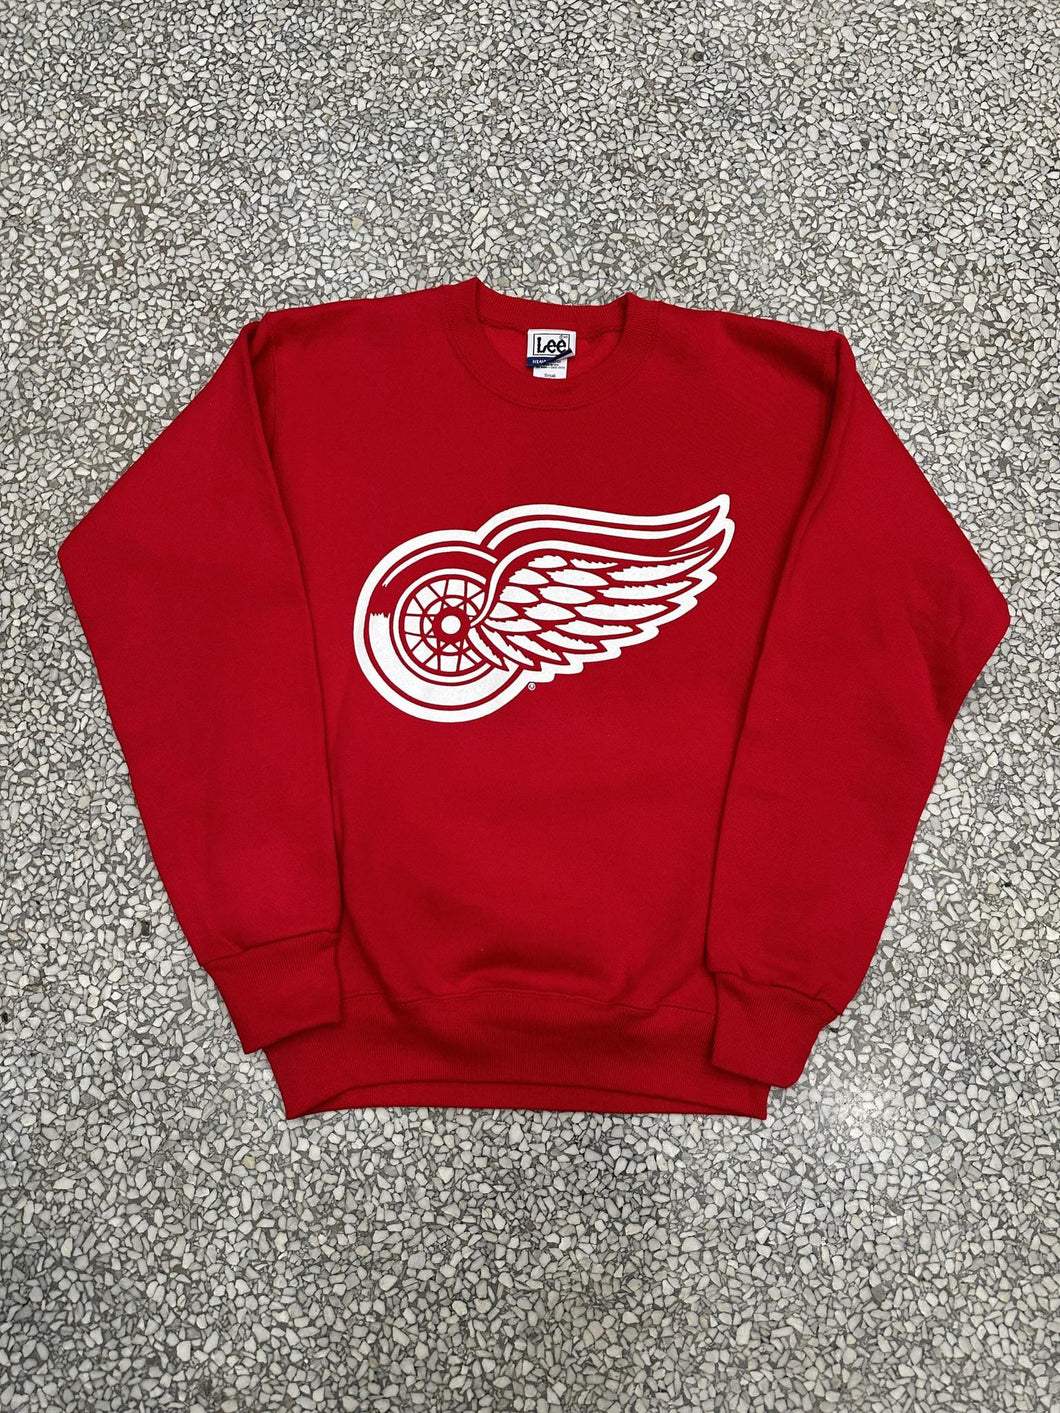 Detroit Red Wings Vintage 90s Classic Wing Logo Crewneck Red ABC Vintage 